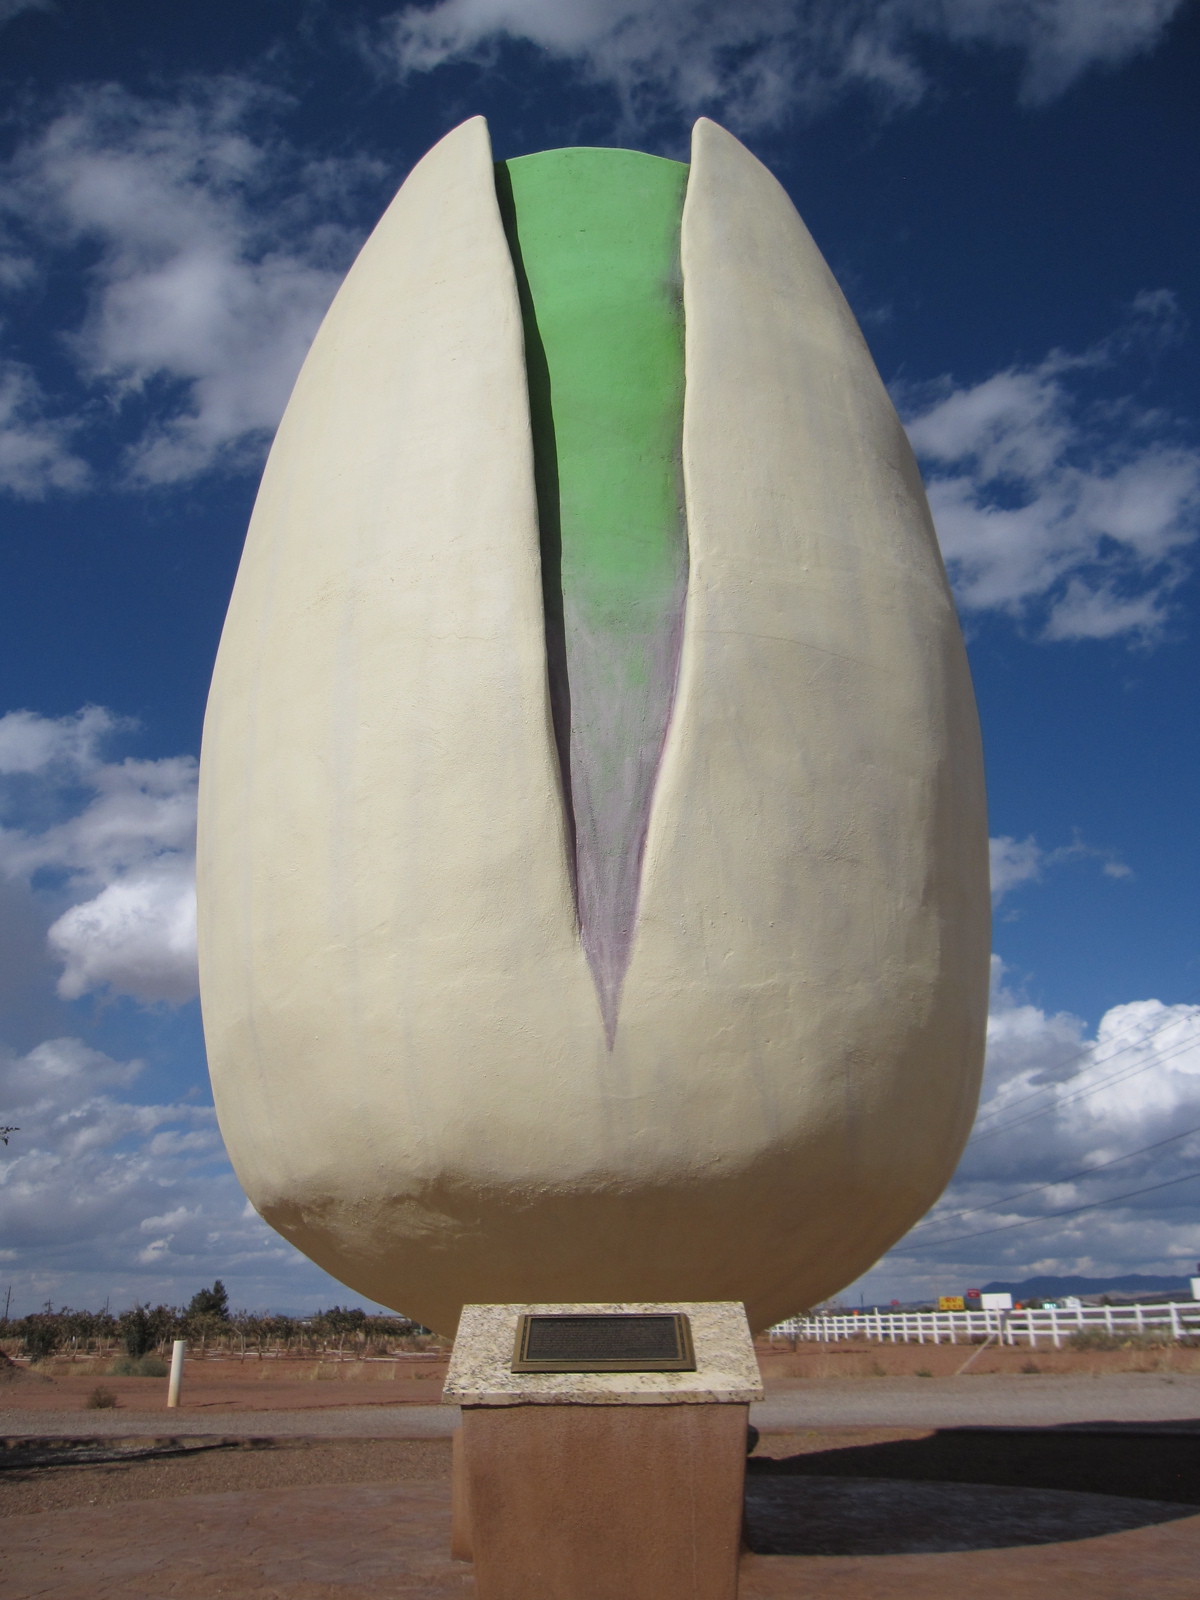 The House of Substance: The Giant Pistachio